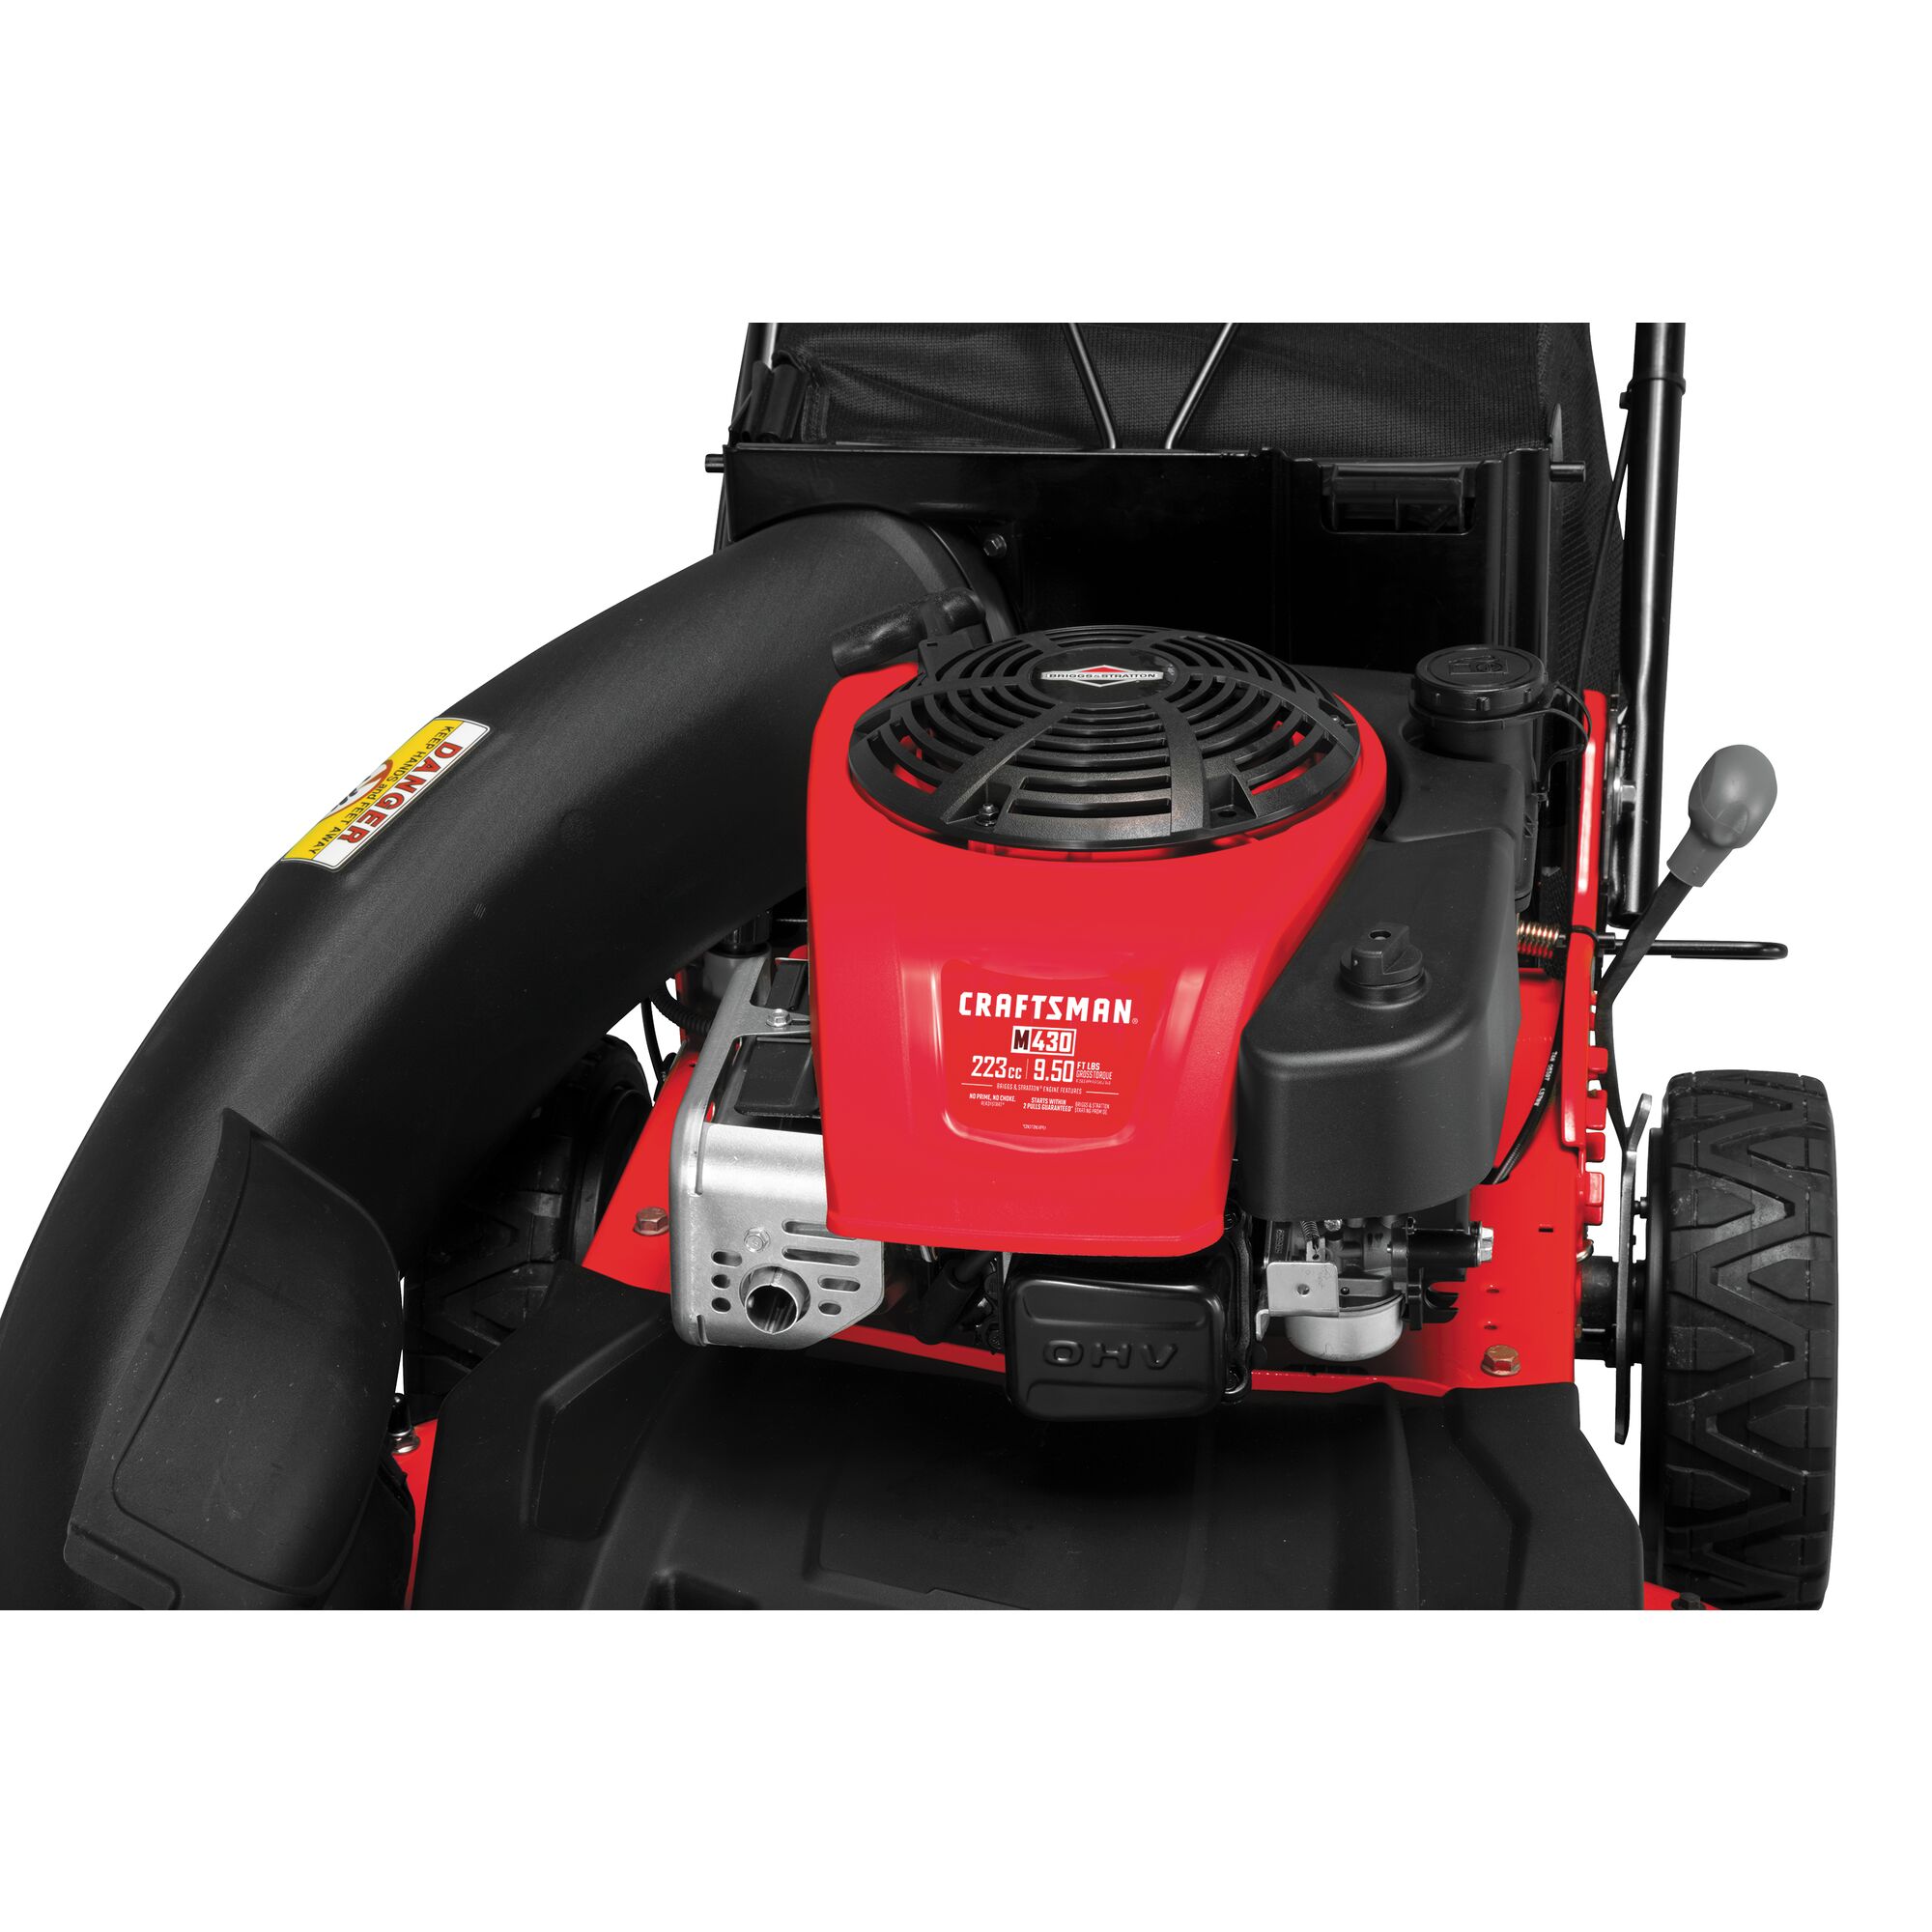 Powerful motor feature of 28 inch 223 c c r w d self propelled mower.